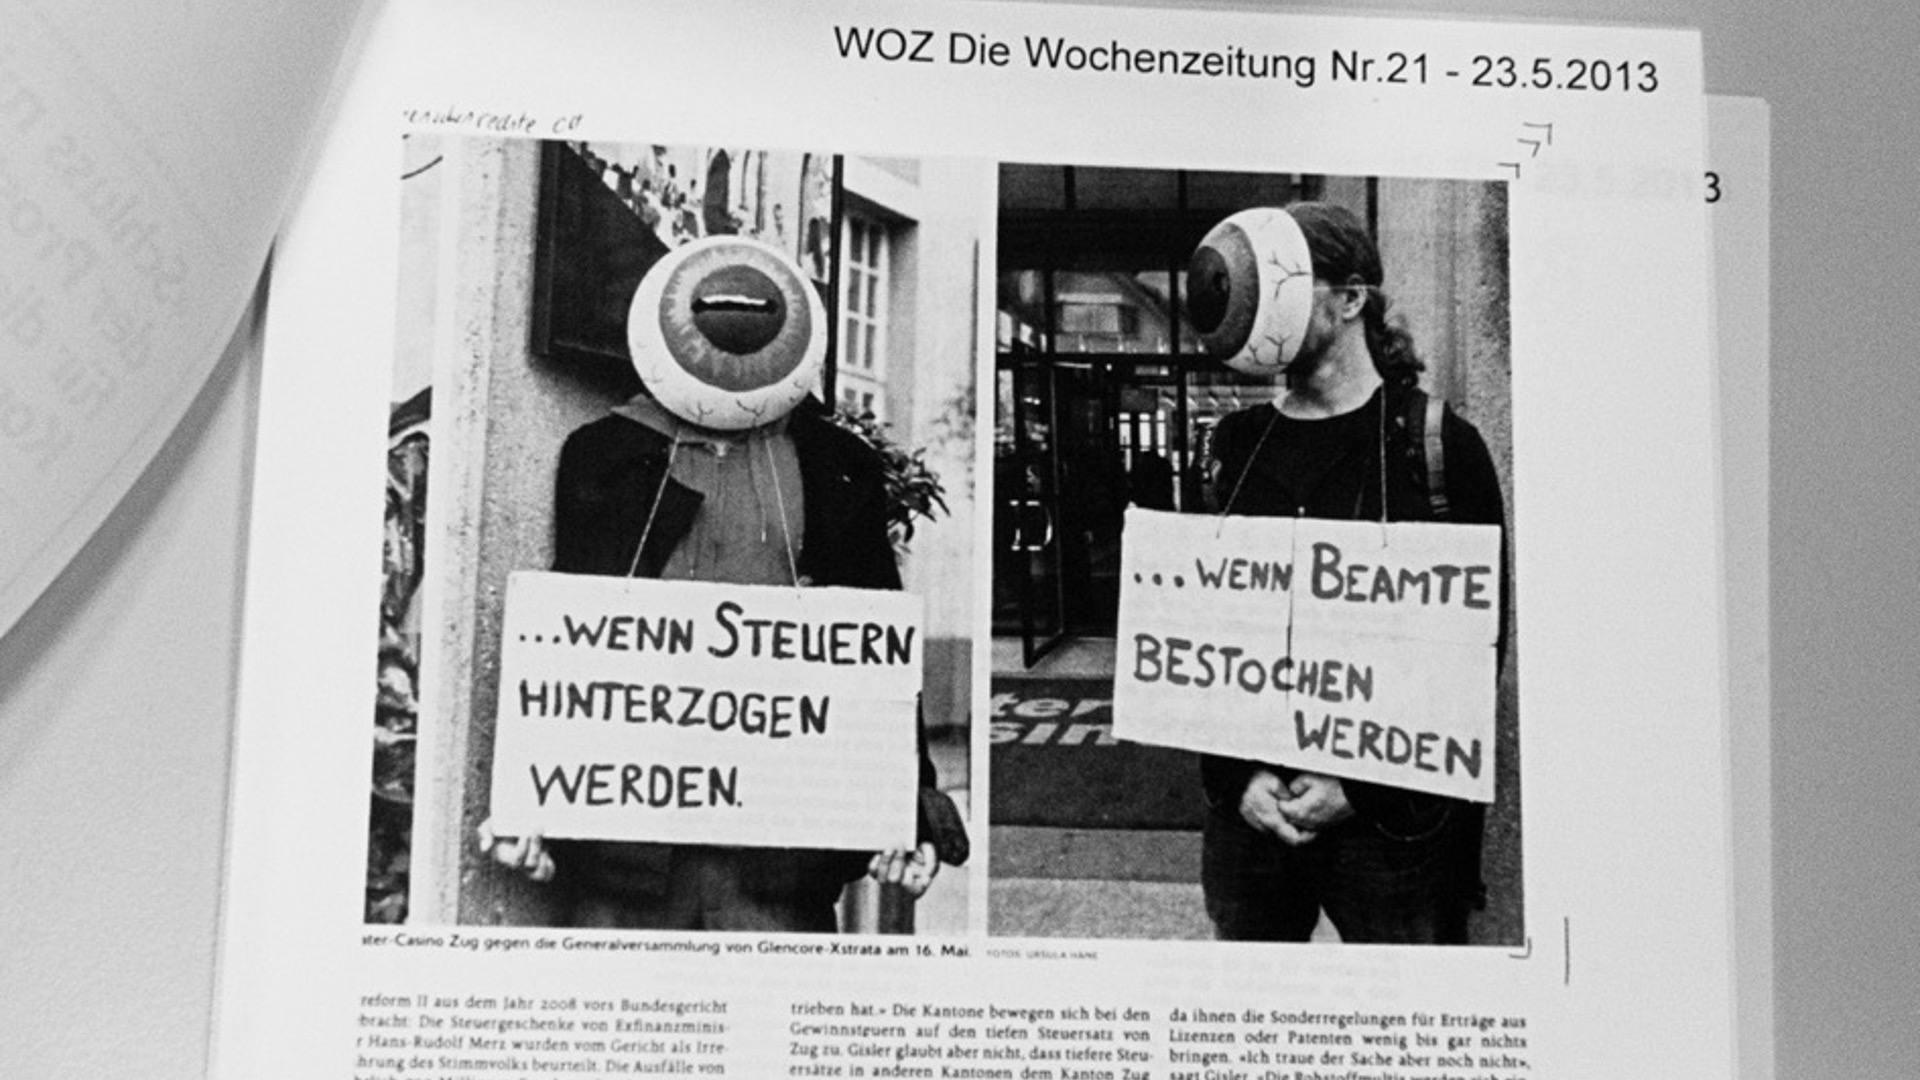 Press coverage of protest outside Glencore-Xtrata General Annual Meeting, 16 May 2013. WOZ Die Wochenzeitung Nr.21 – 23.5.2013. Press Archive, Bibliothek Zug